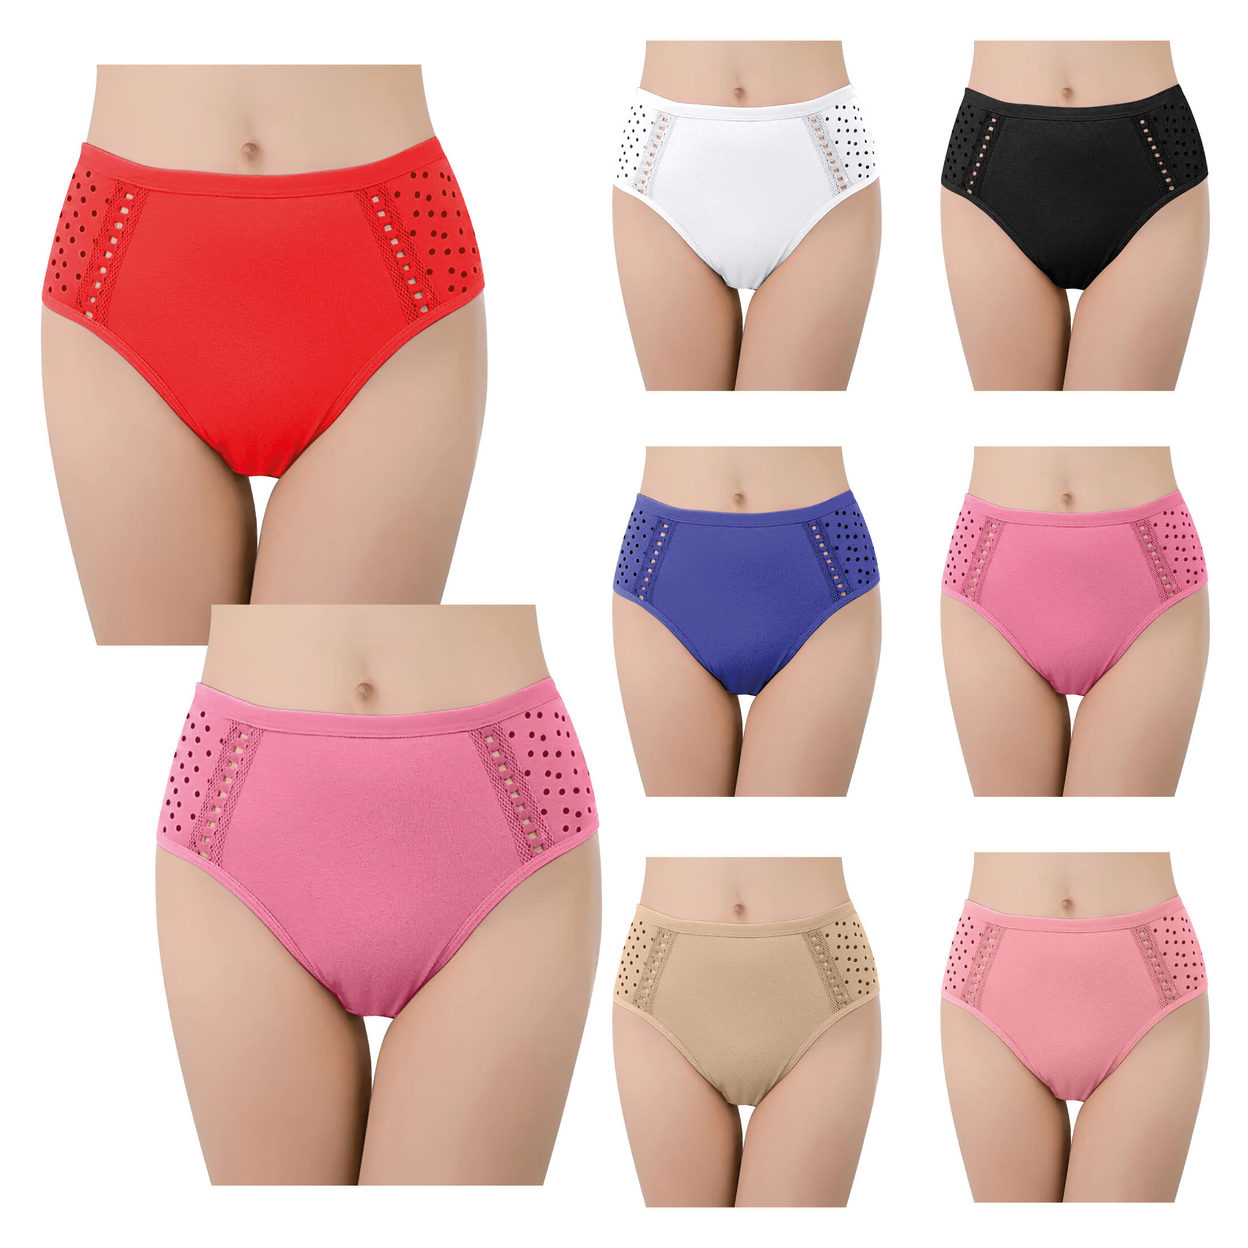 12-Pack: Women's Ultra Soft Moisture Wicking Panties Cotton Perfect Fit Underwear (Plus Sizes Available) - Small